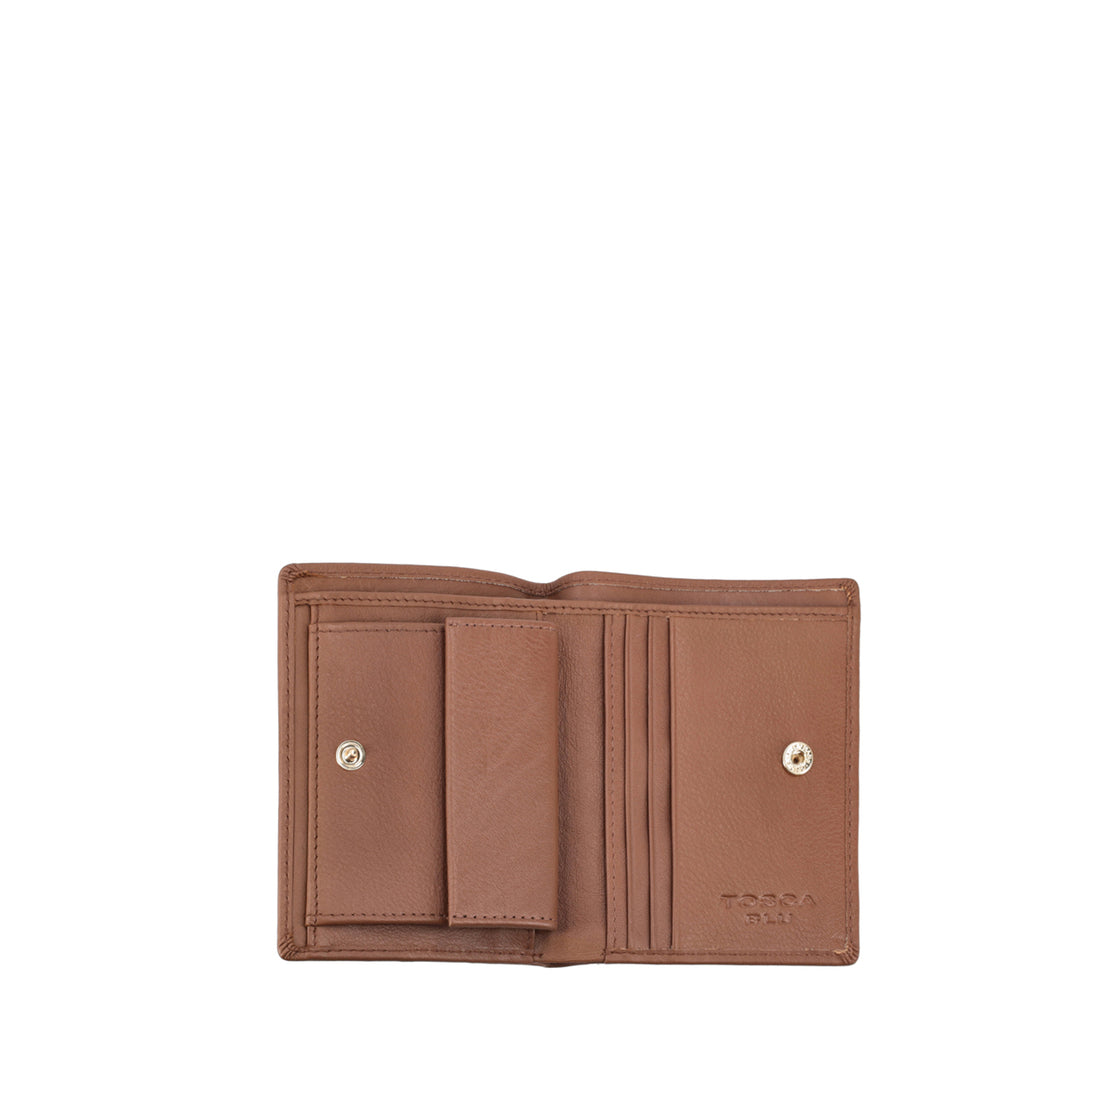 TAN MARGHERITA SMALL LEATHER WALLET